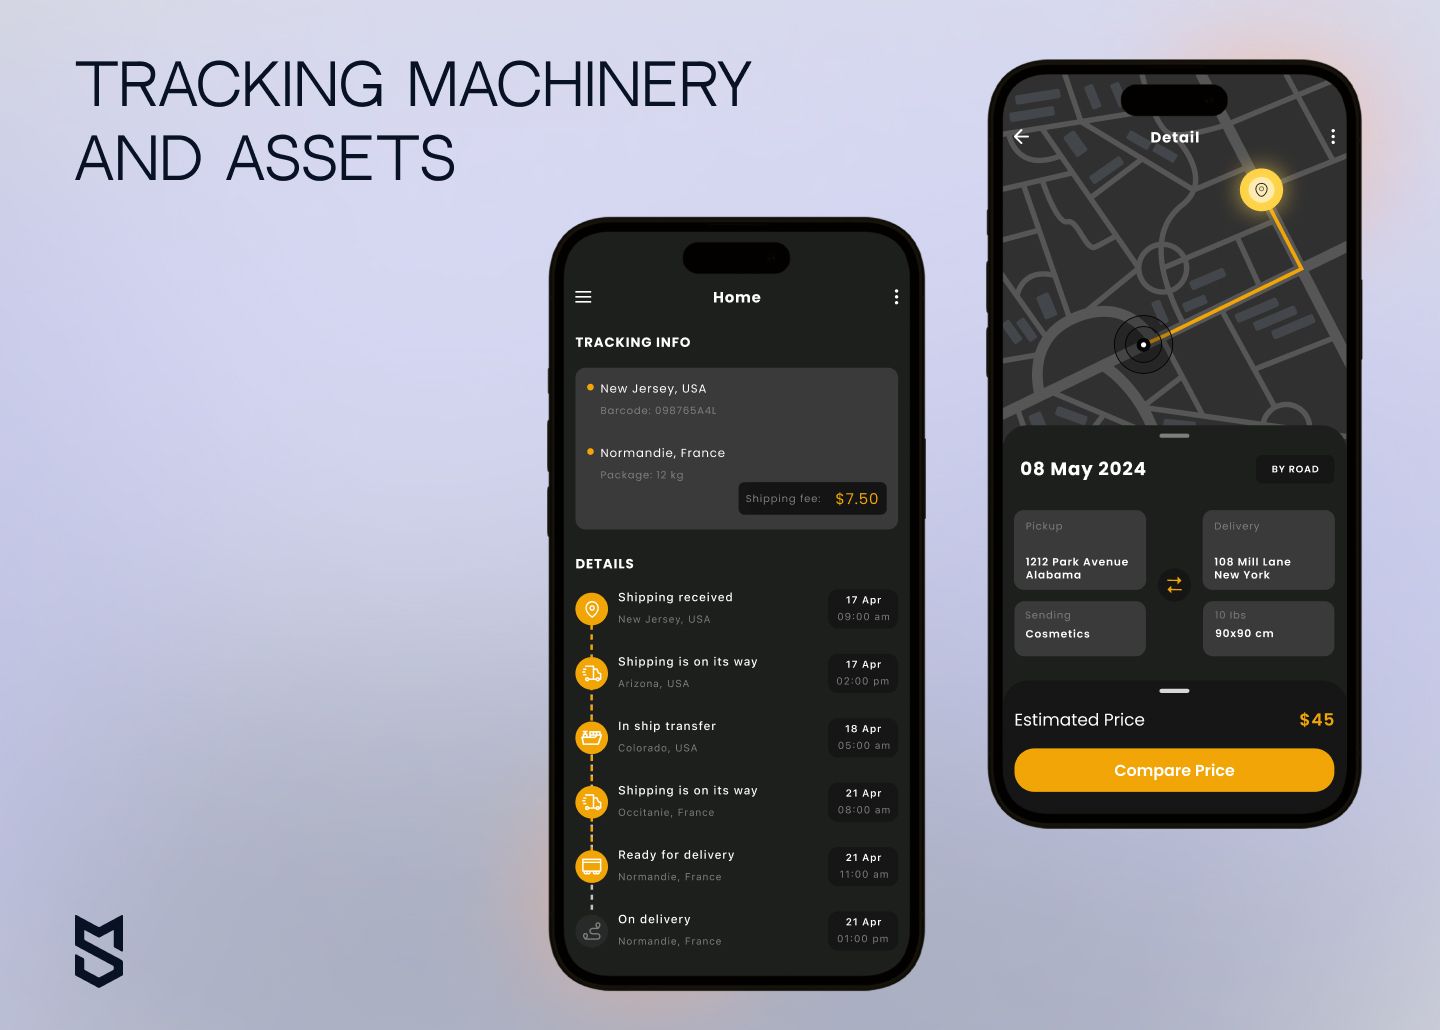 Tracking machinery and assets